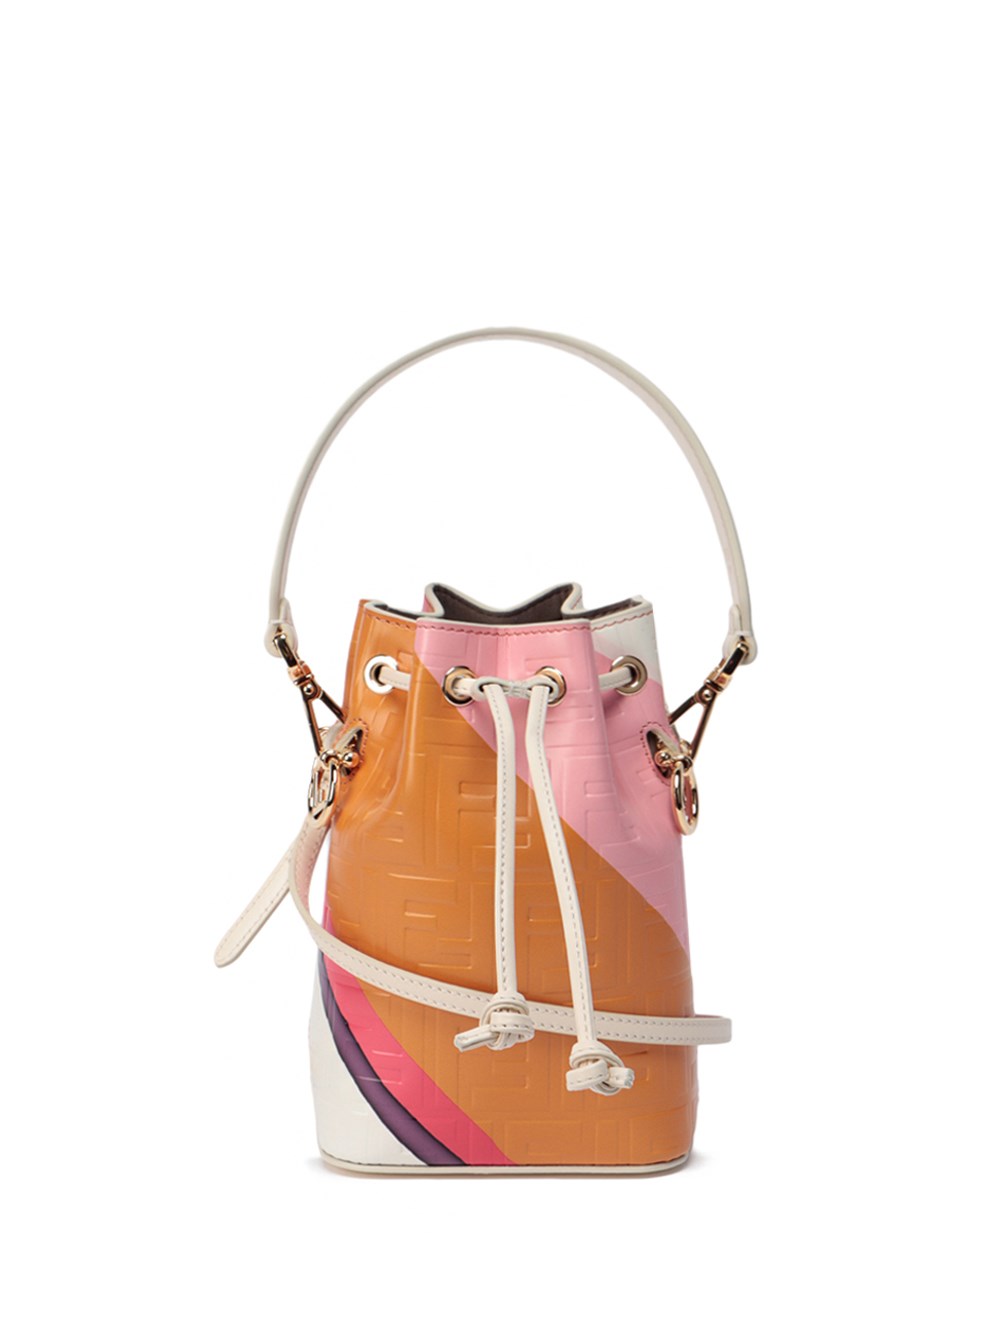 The Mon Tresor bucket bag is made with soft nappa leather and the one above has a three-dimensional texture FF motif and a multicolor diagonal striped print.